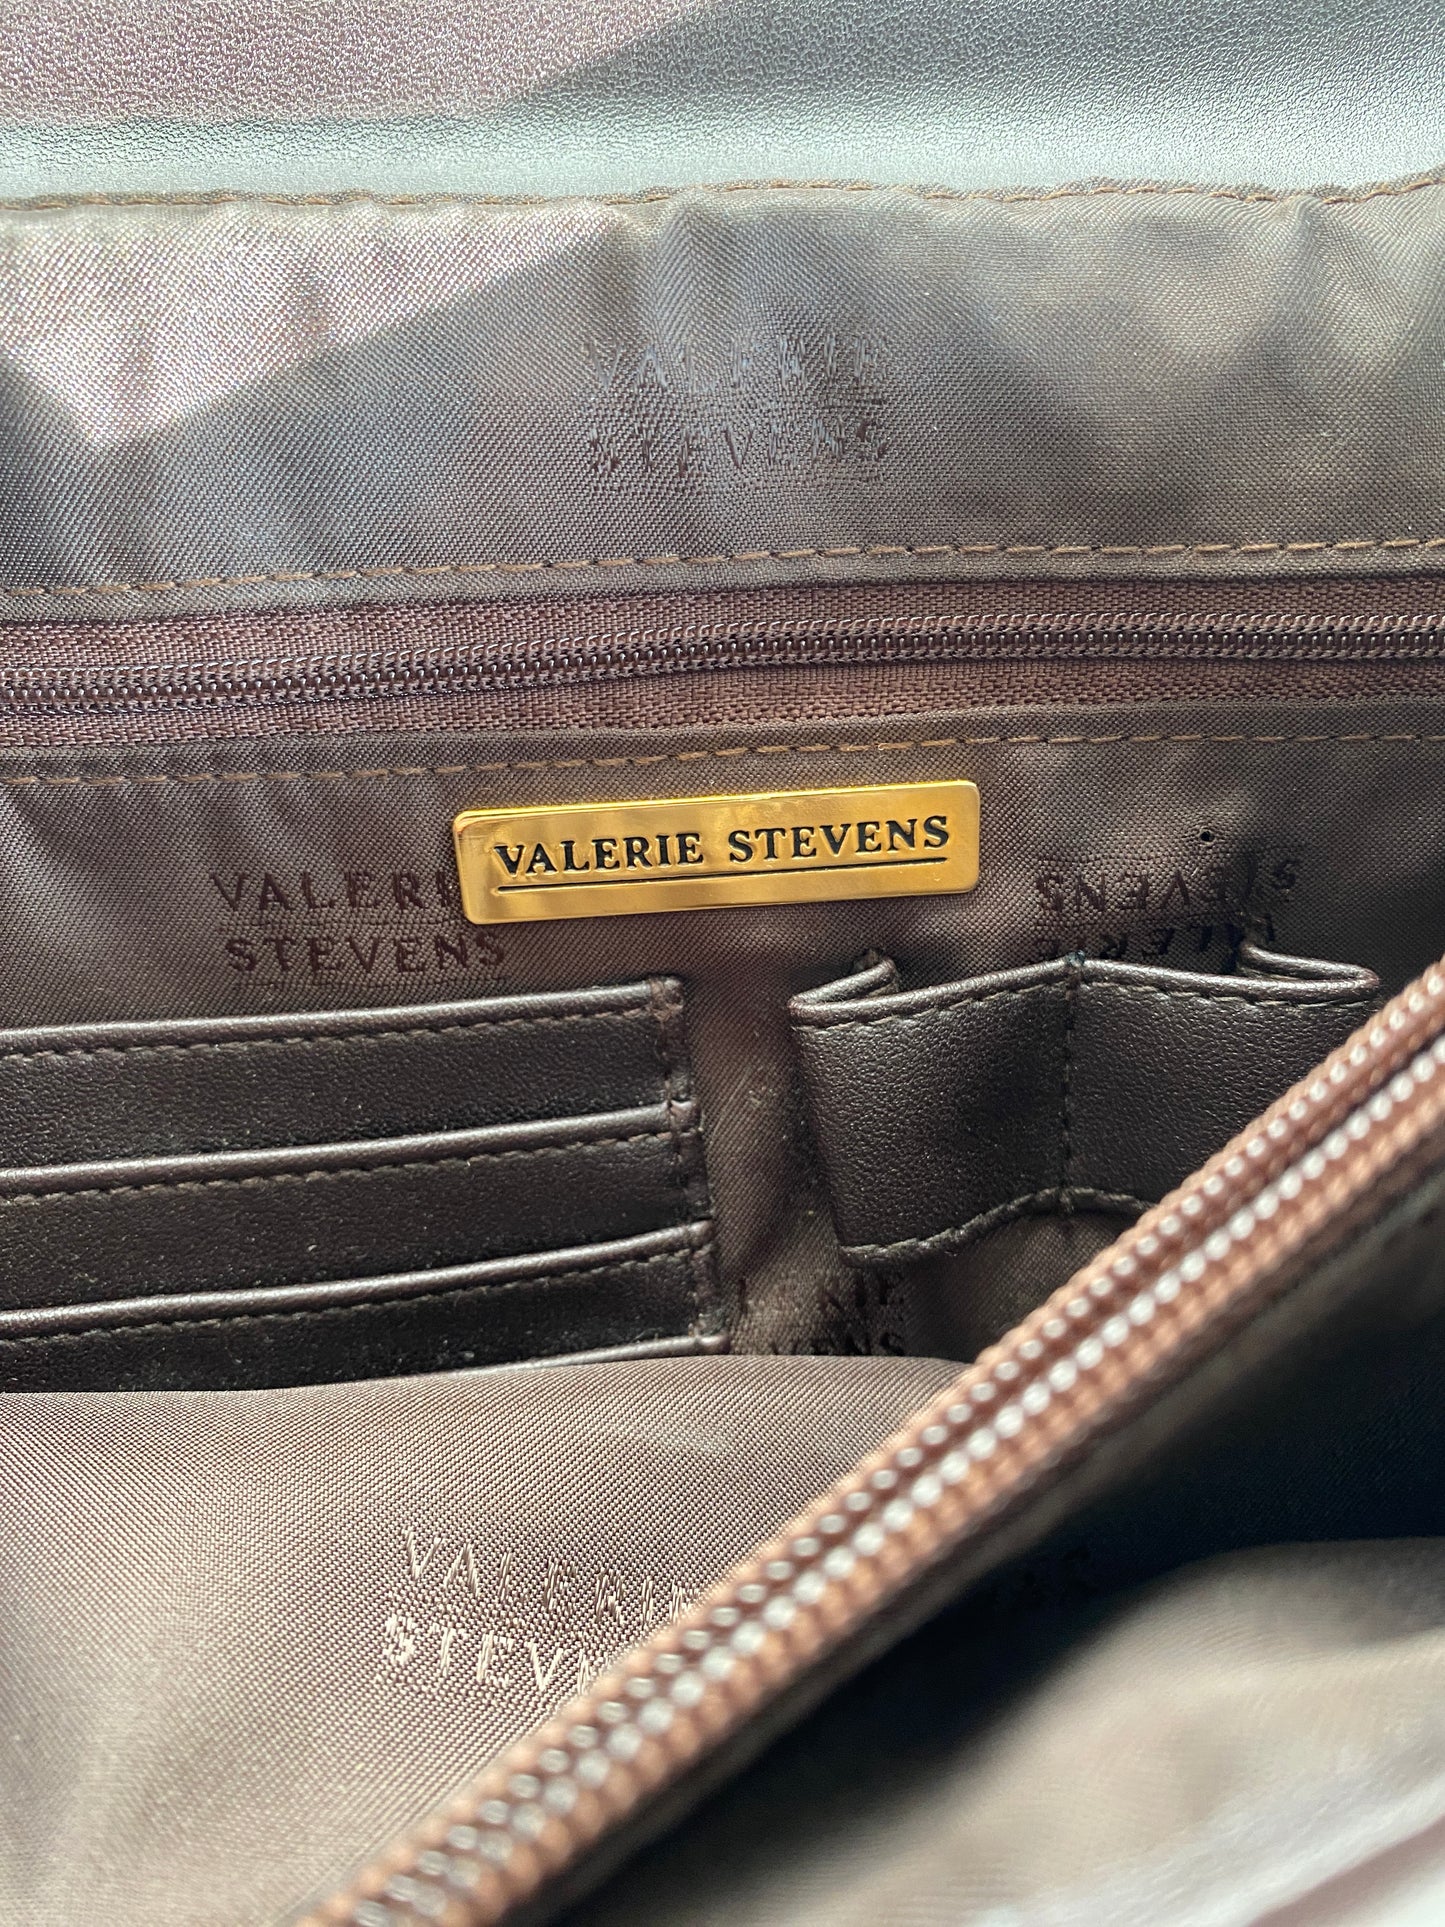 Valerie Stevens Bag with Gold Accents